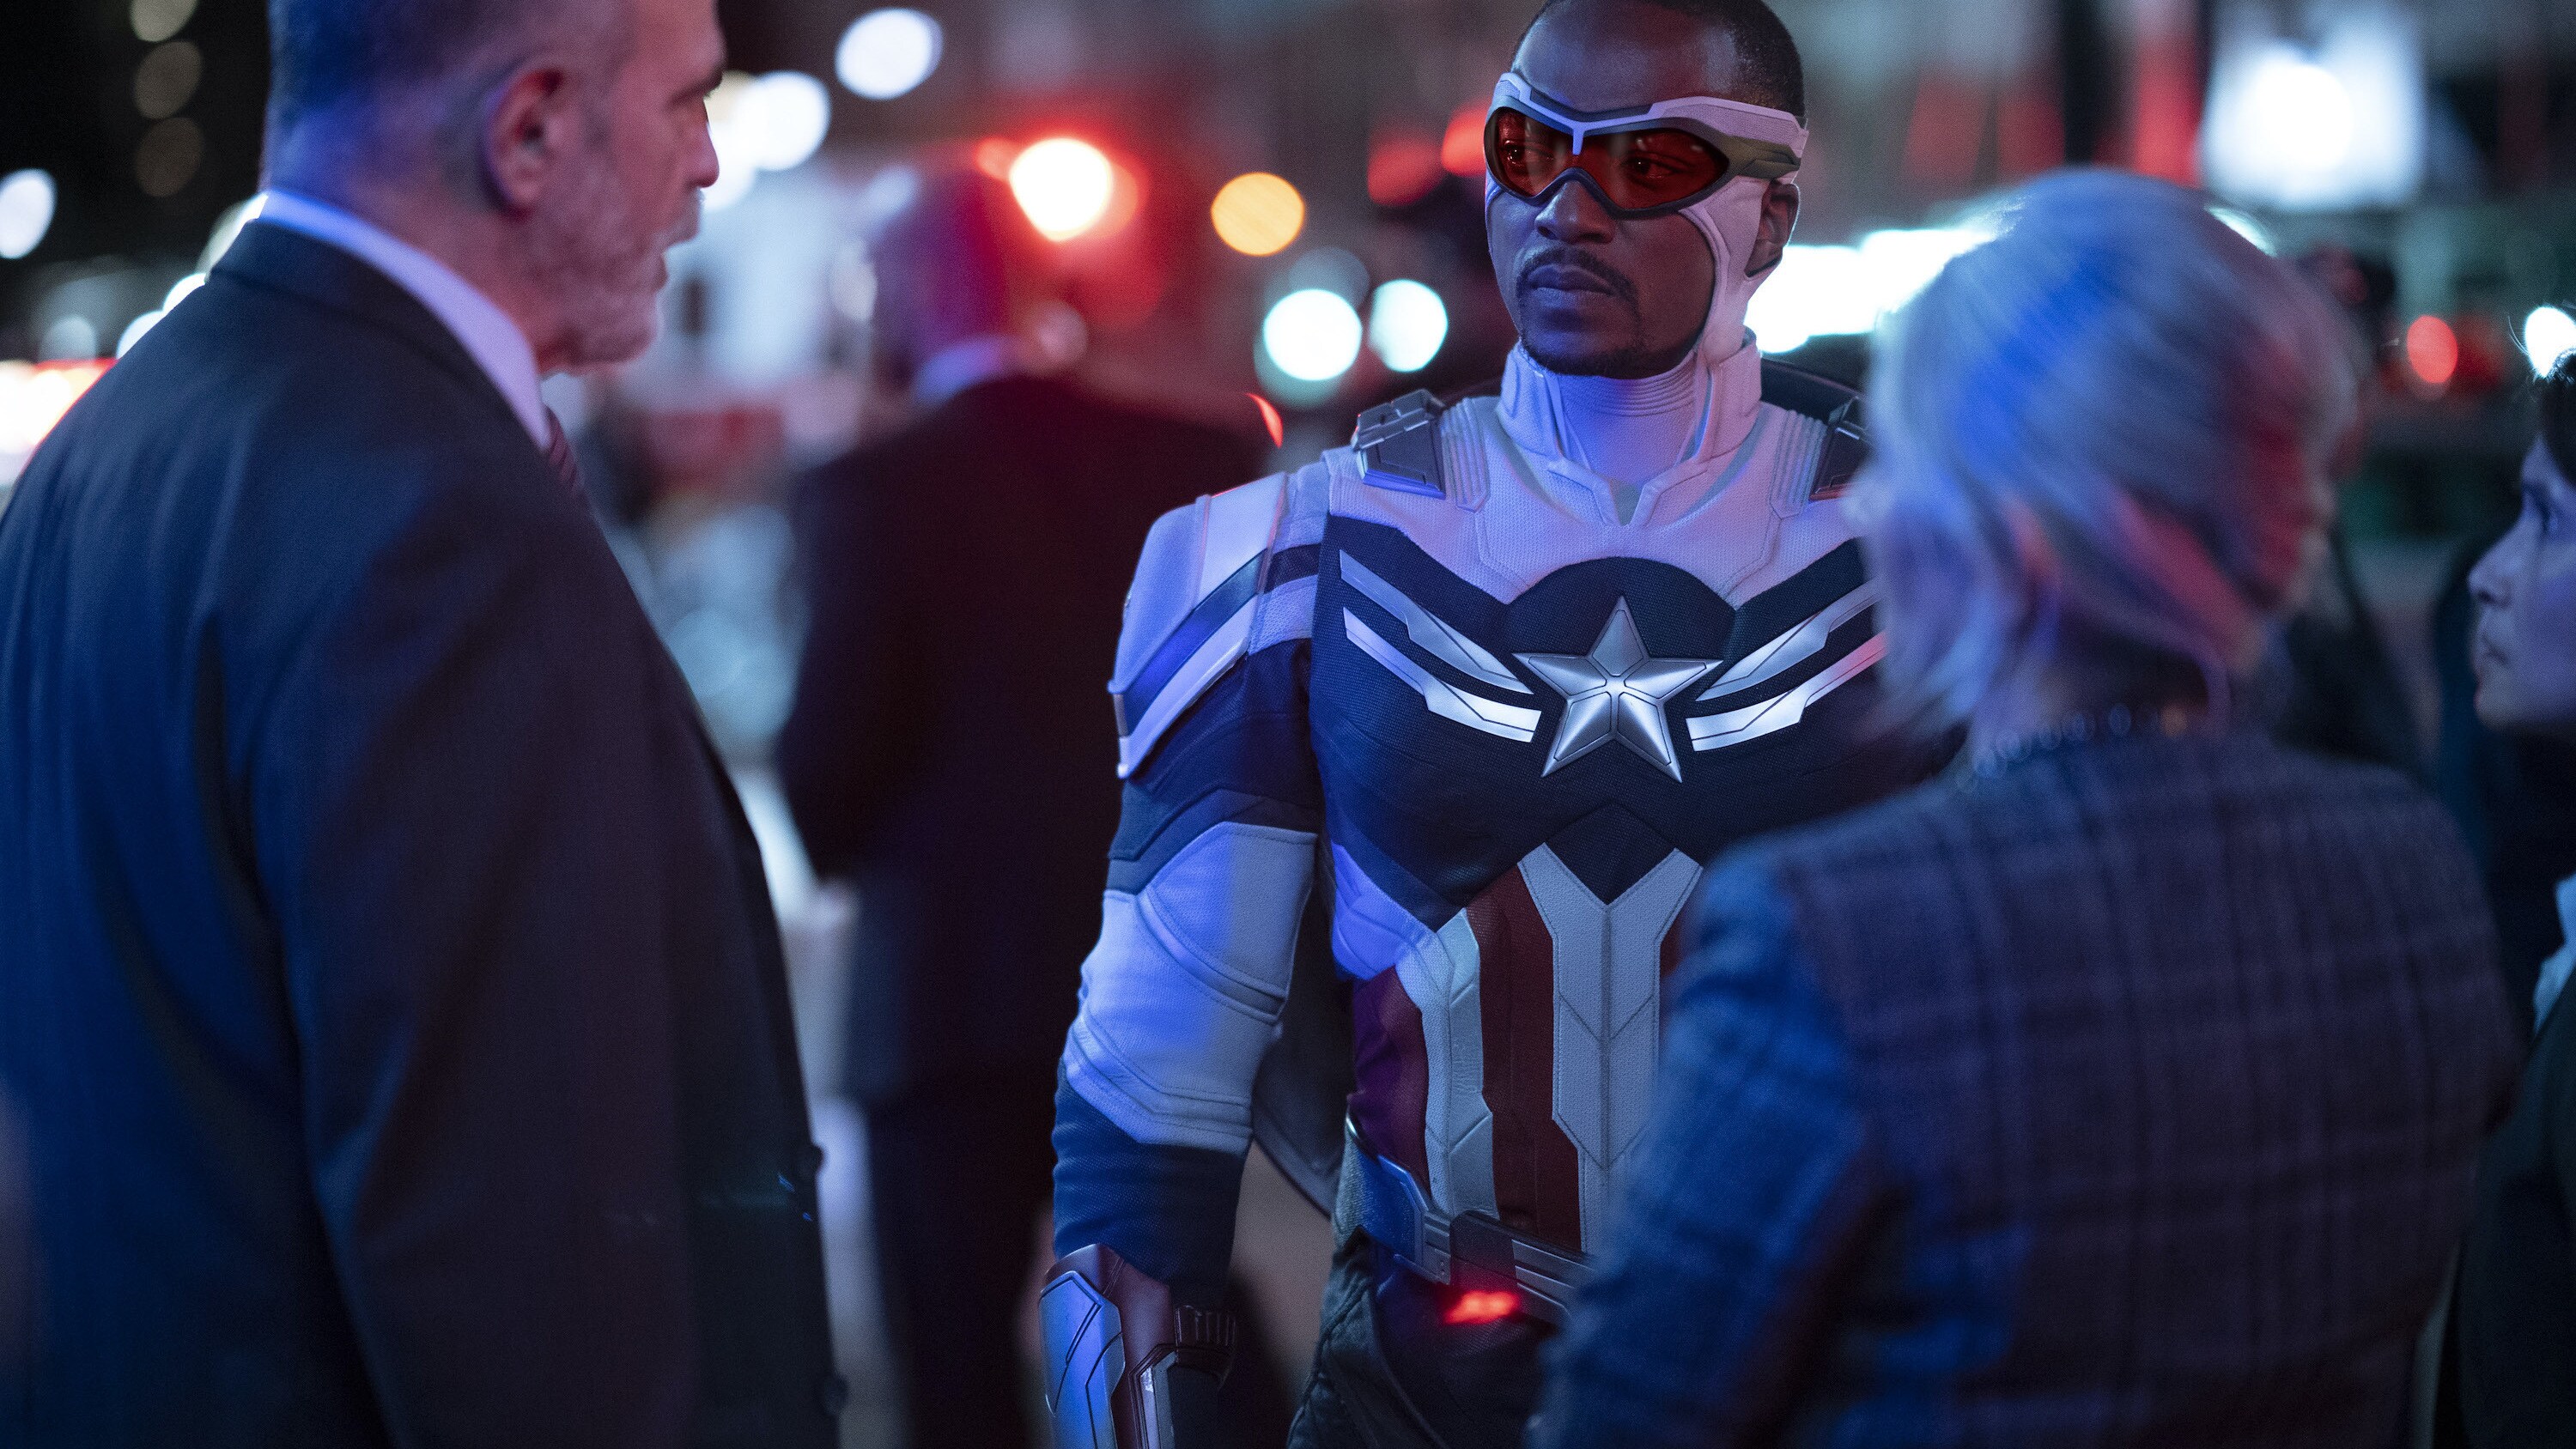 Falcon/Sam Wilson (Anthony Mackie) in Marvel Studios' THE FALCON AND THE WINTER SOLDIER exclusively on Disney+. Photo by Eli Adé. ©Marvel Studios 2021. All Rights Reserved. 